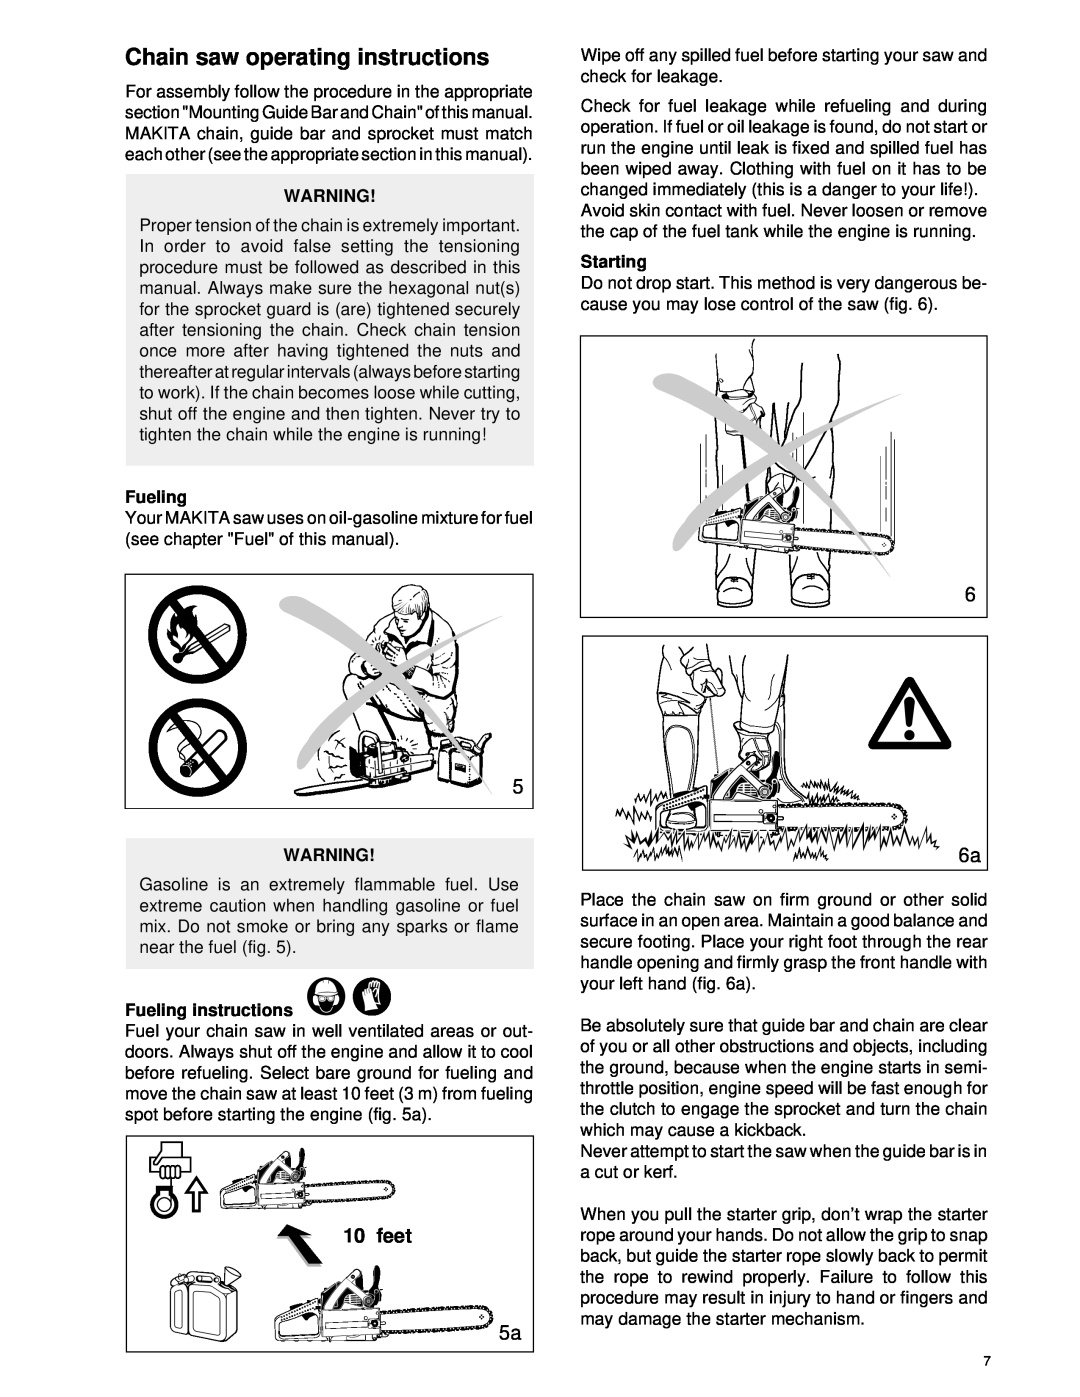 Dolmar Chain Saw manual Chain saw operating instructions, feet, Fueling instructions, Starting 